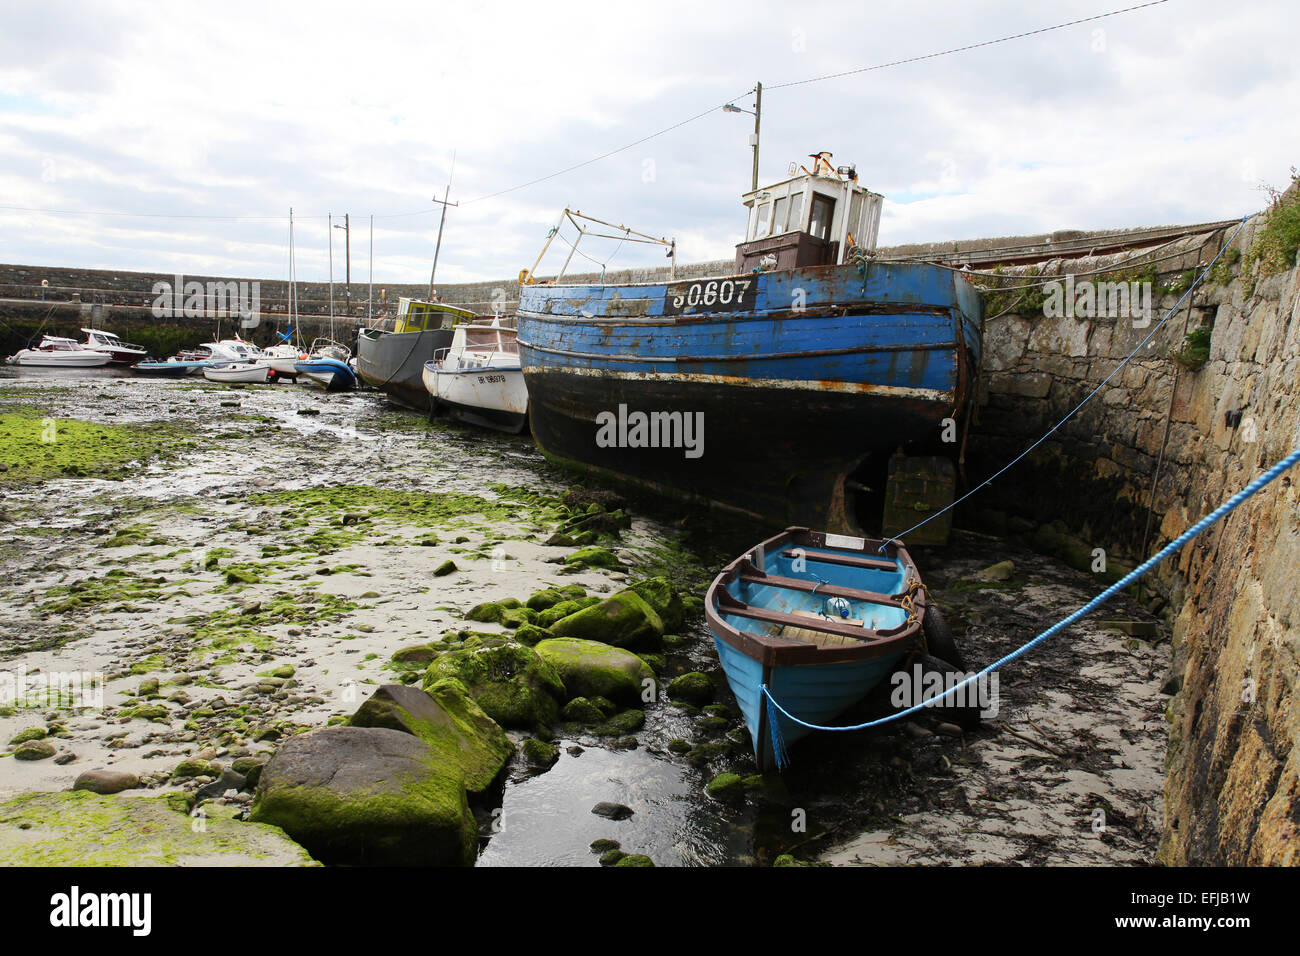 Fishing Boats moored in a small harbour at low tide in Galway Bay Ireland EU Stock Photo